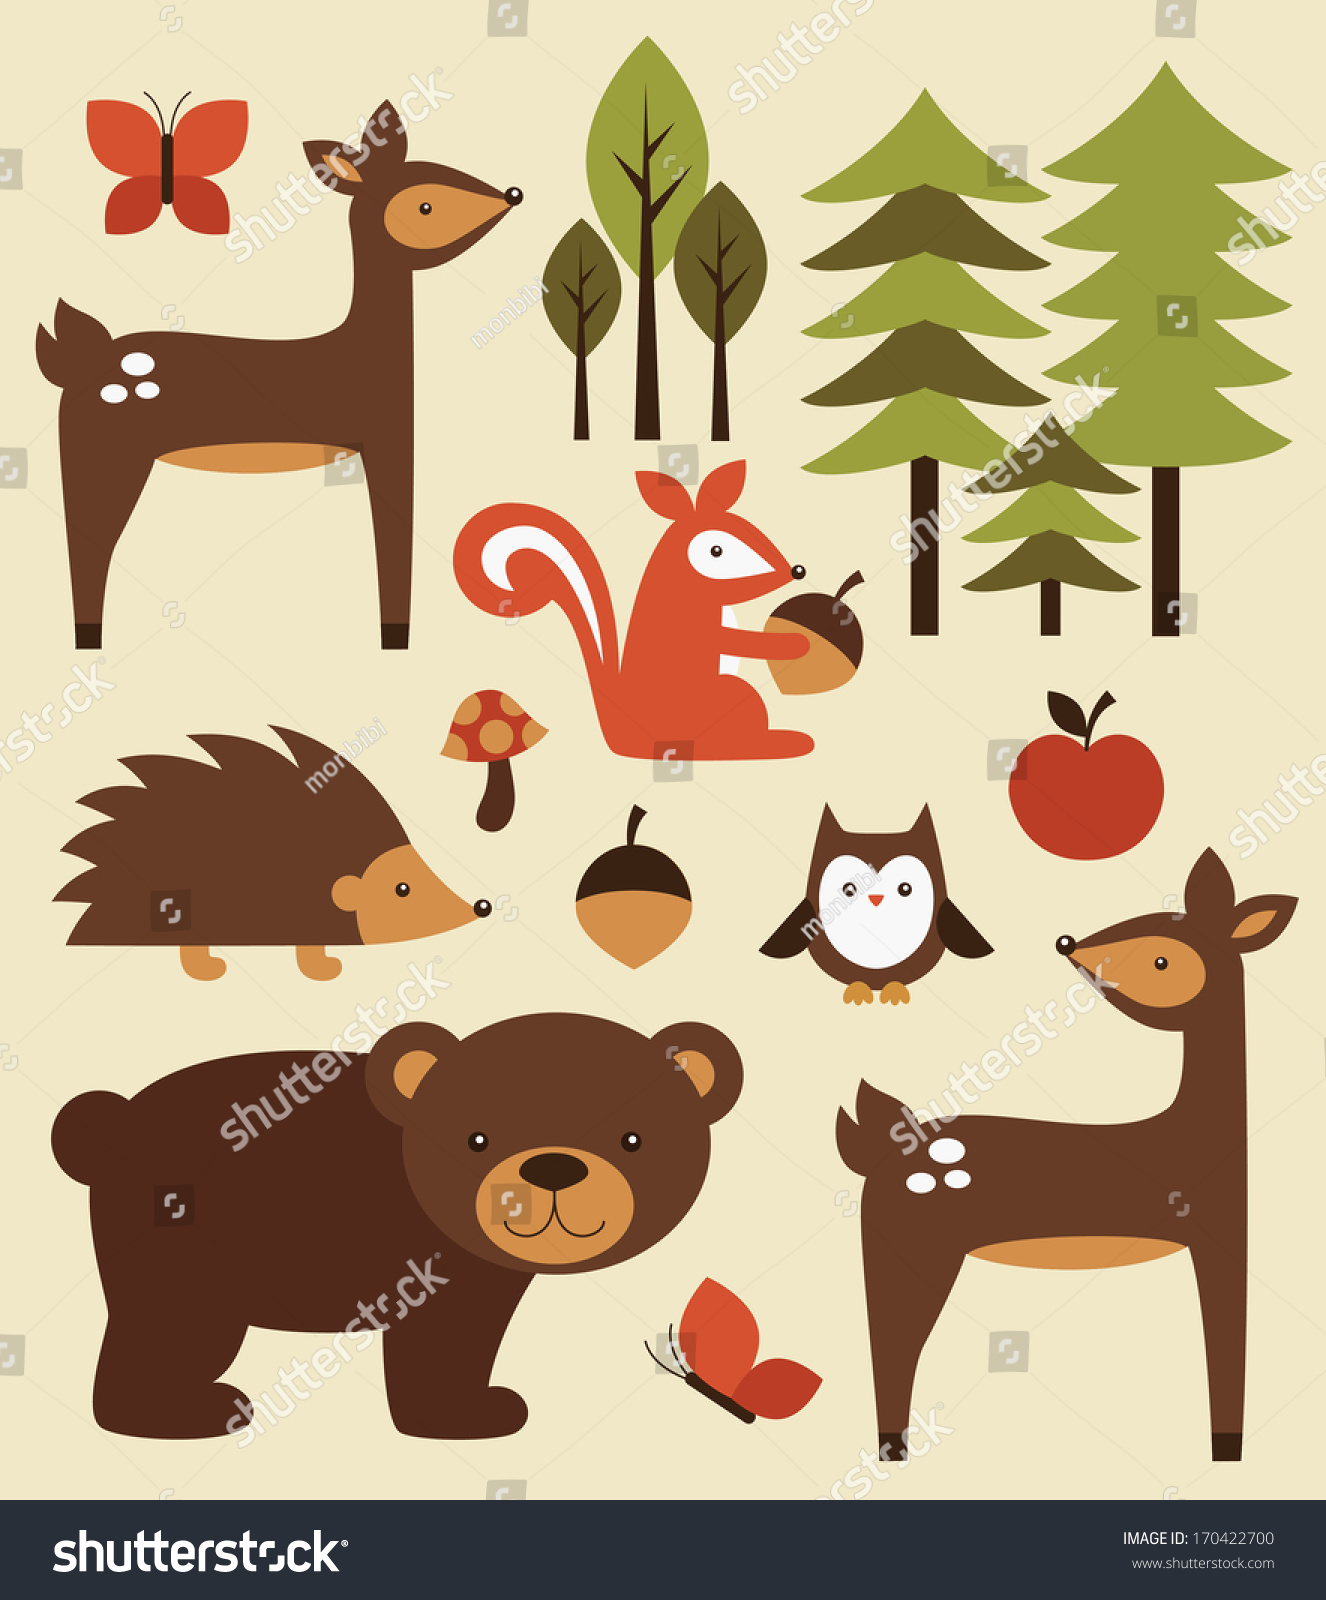 Forest Animals Collection. Vector Illustration - 170422700 : Shutterstock